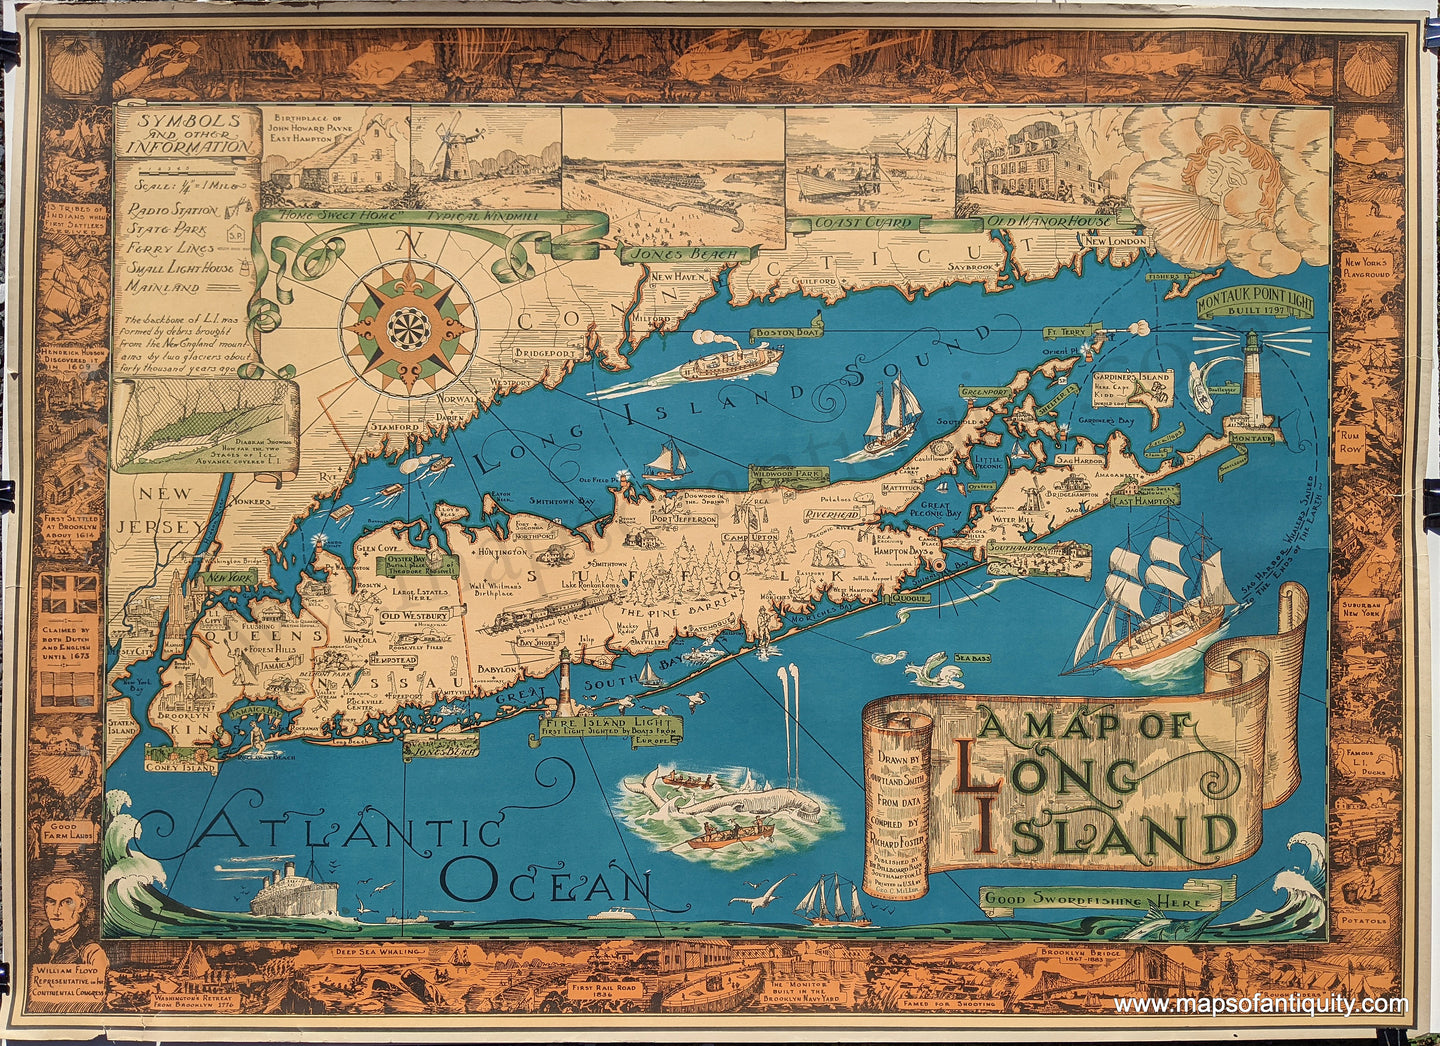 Genuine-Antique-Map-A-Map-of-Long-Island-New-York-Long-Island-1933-Courtland-Smith-Maps-Of-Antiquity